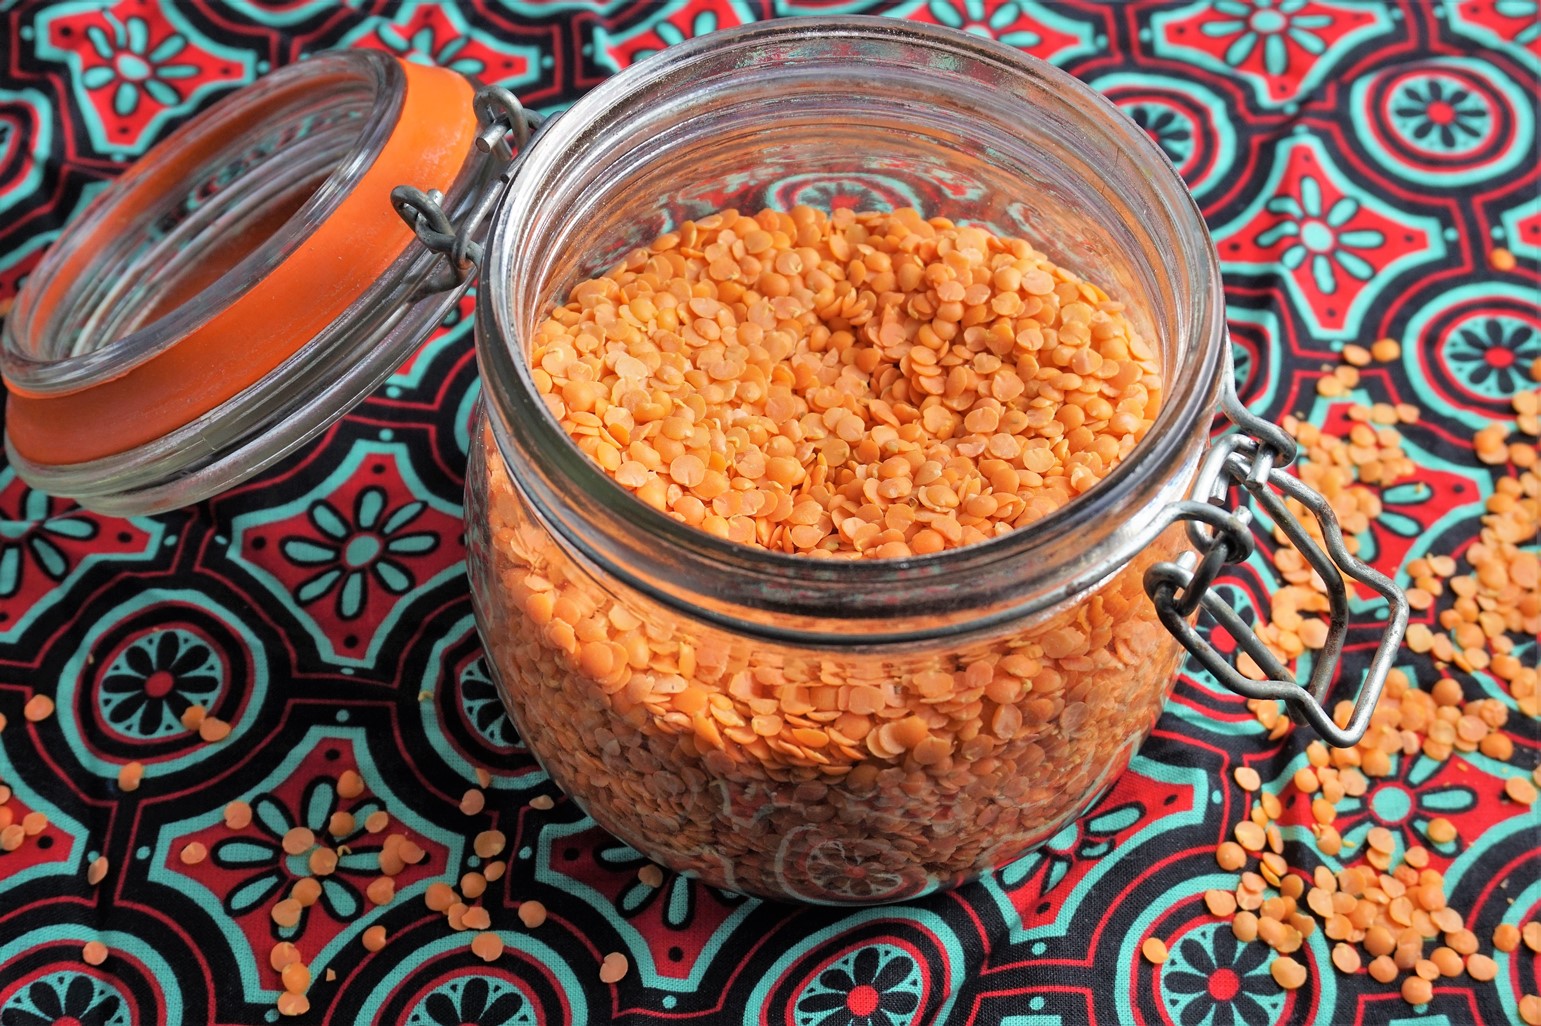 a jar of red lentils on a brightly coloured patterned cloth